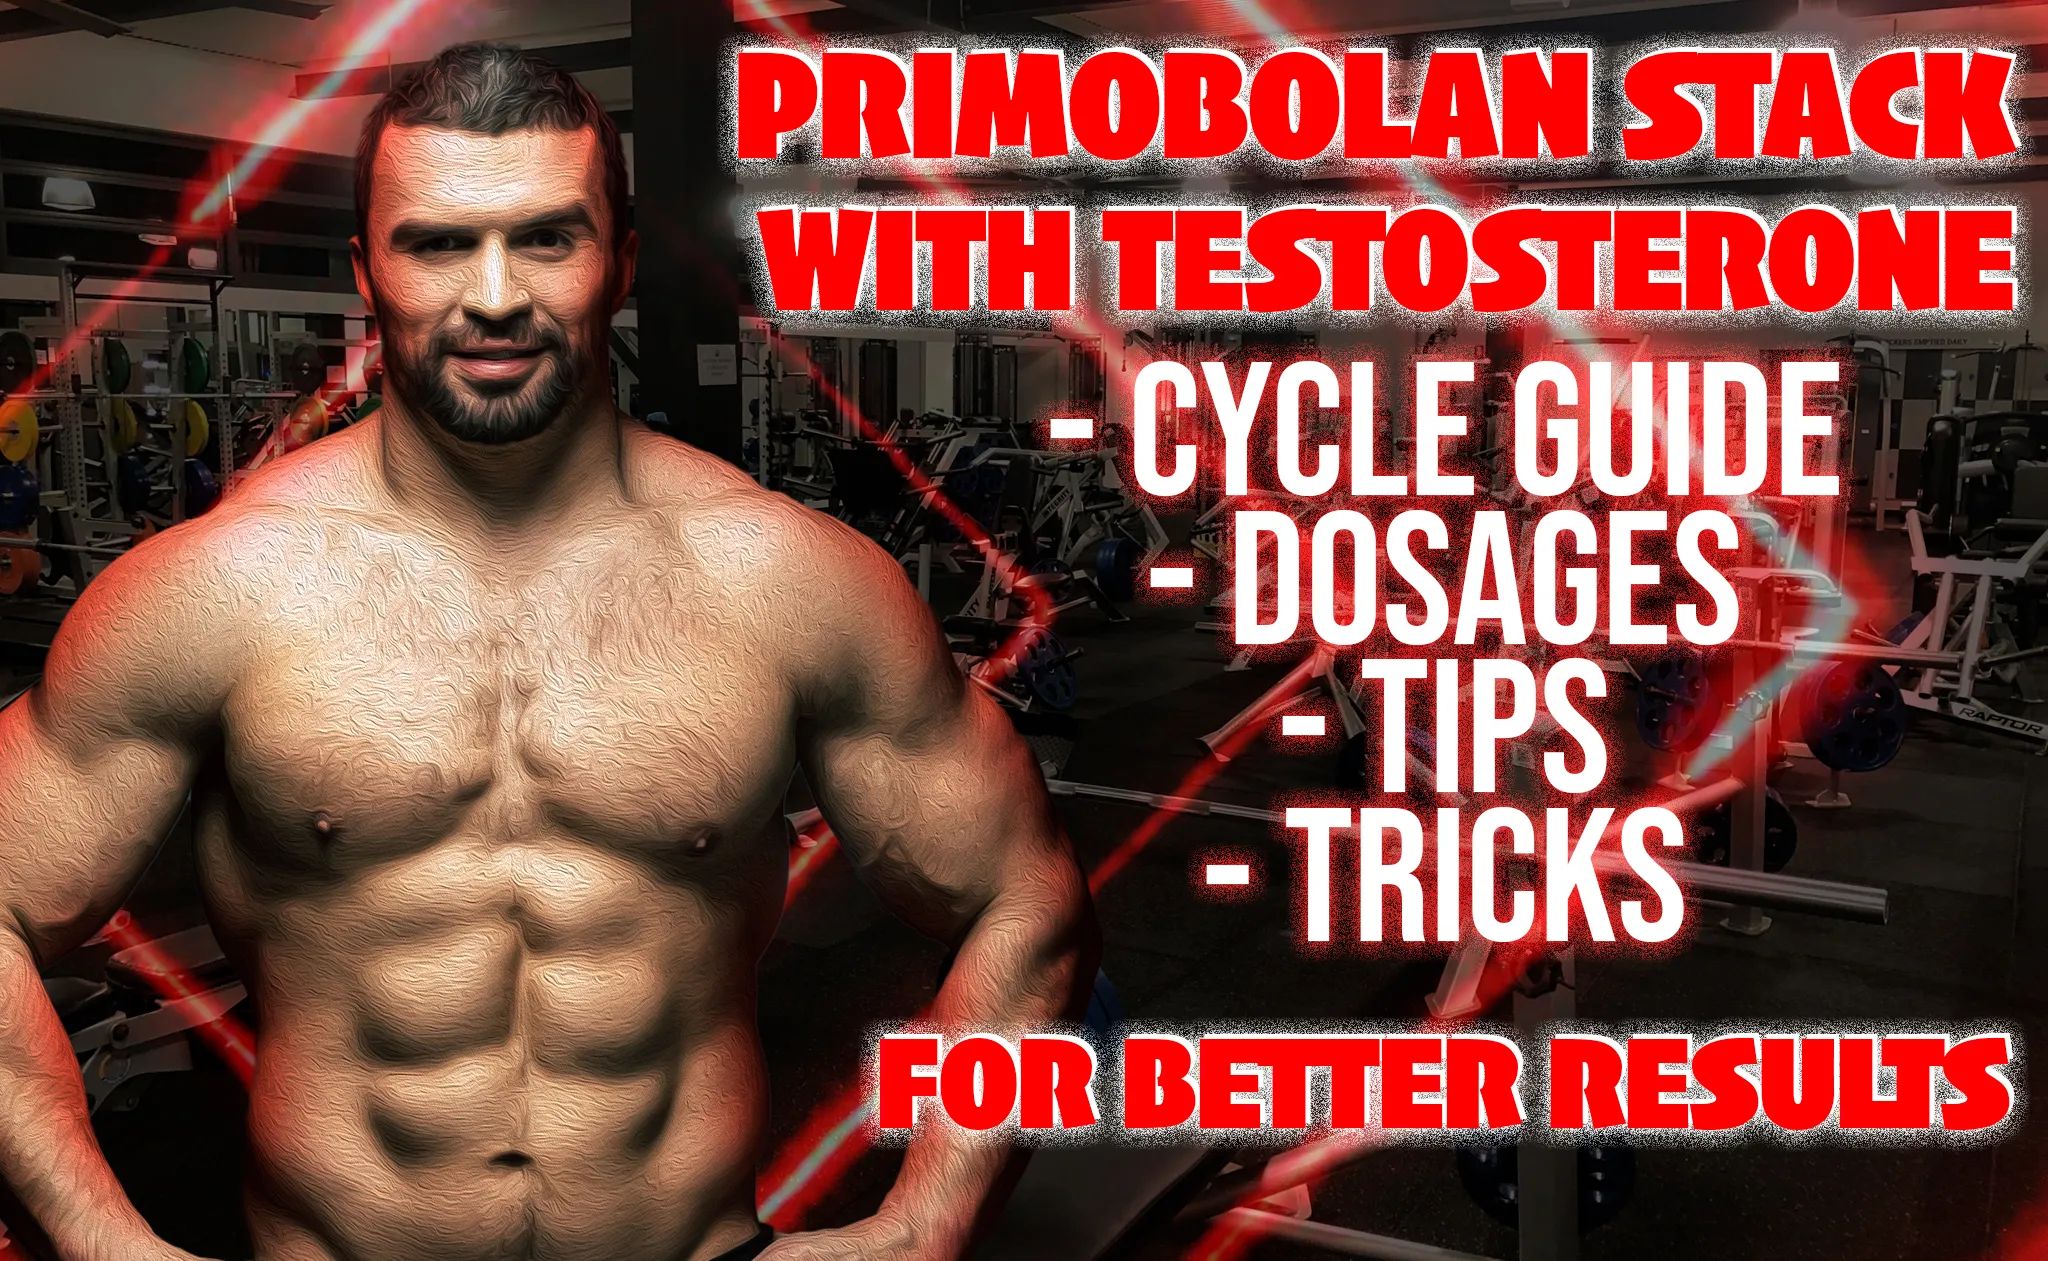 Primobolan Stack with Testosterone – Cycle Guide, Dosages, Tips and Tricks for Better Results